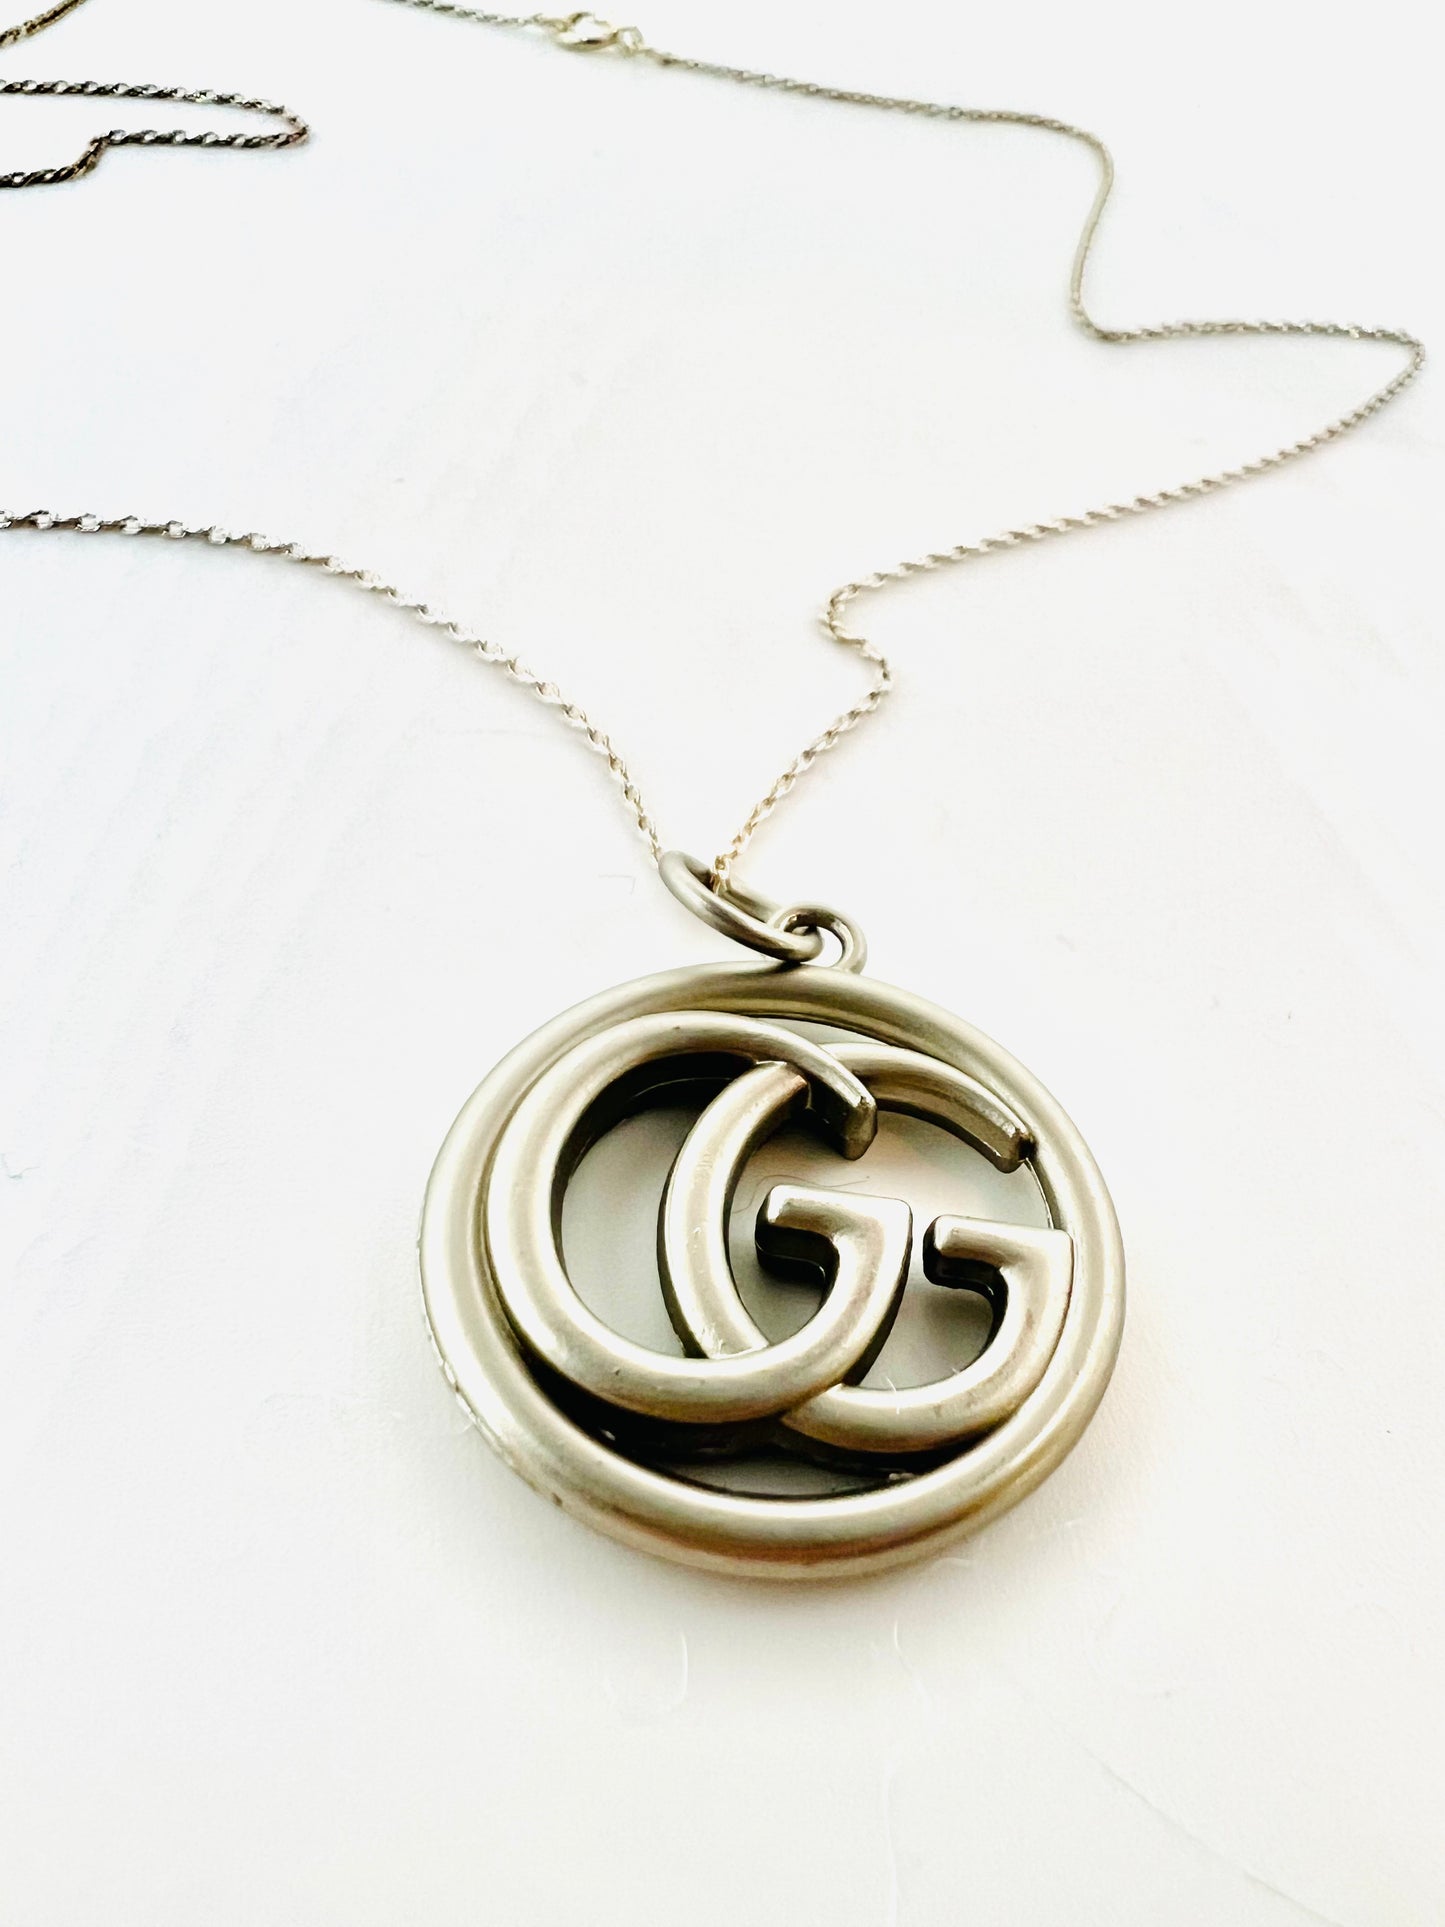 Silver Logo Charm Repurposed Necklace